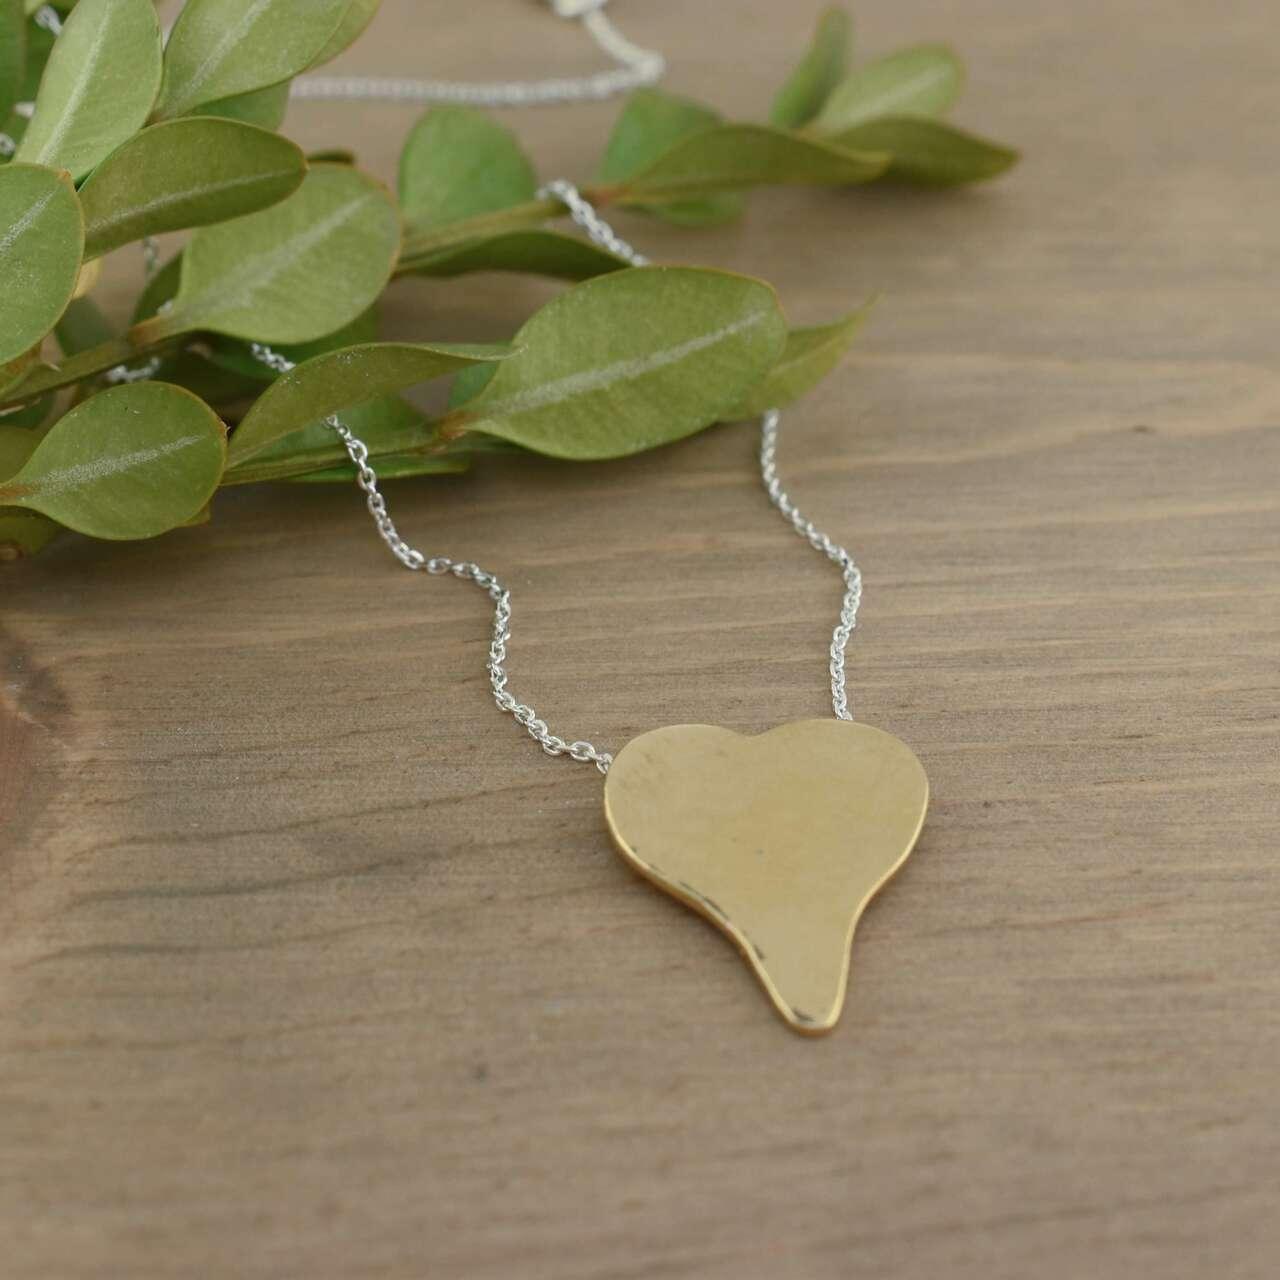 Heart of Gold Necklace in handcrafted sterling silver and gold plating 